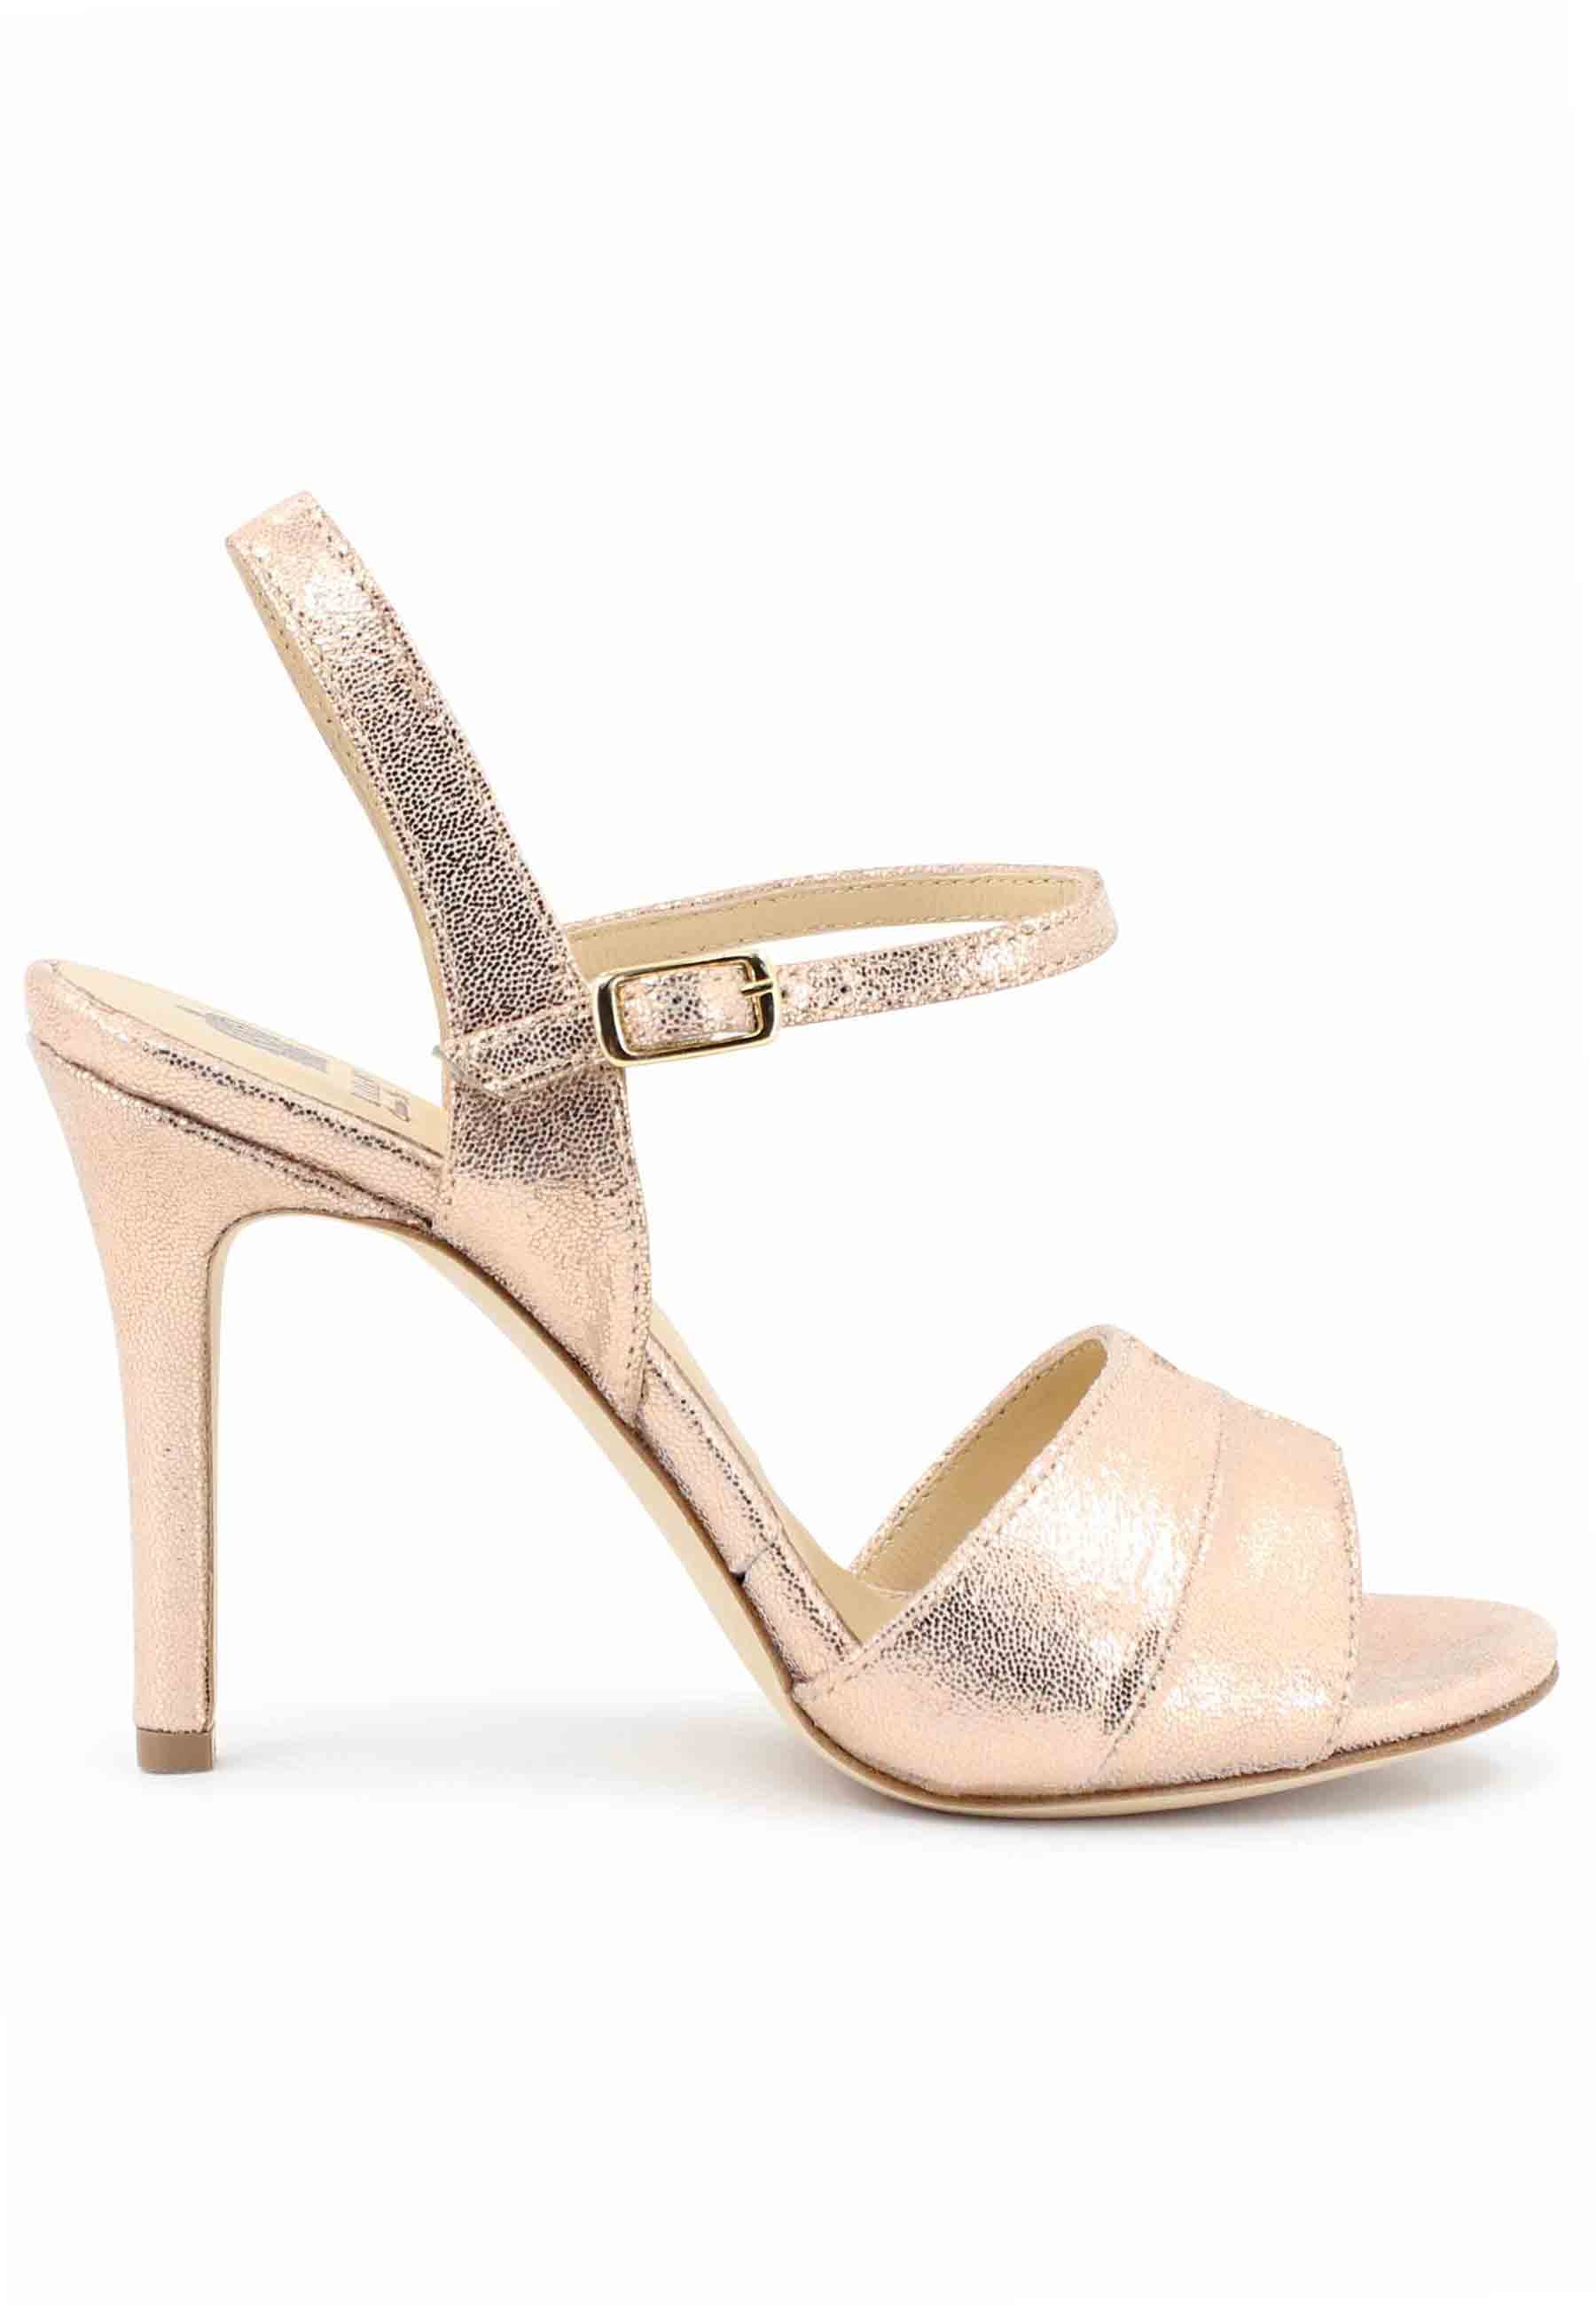 Women's sandals in salmon laminated leather with high heel and ankle strap